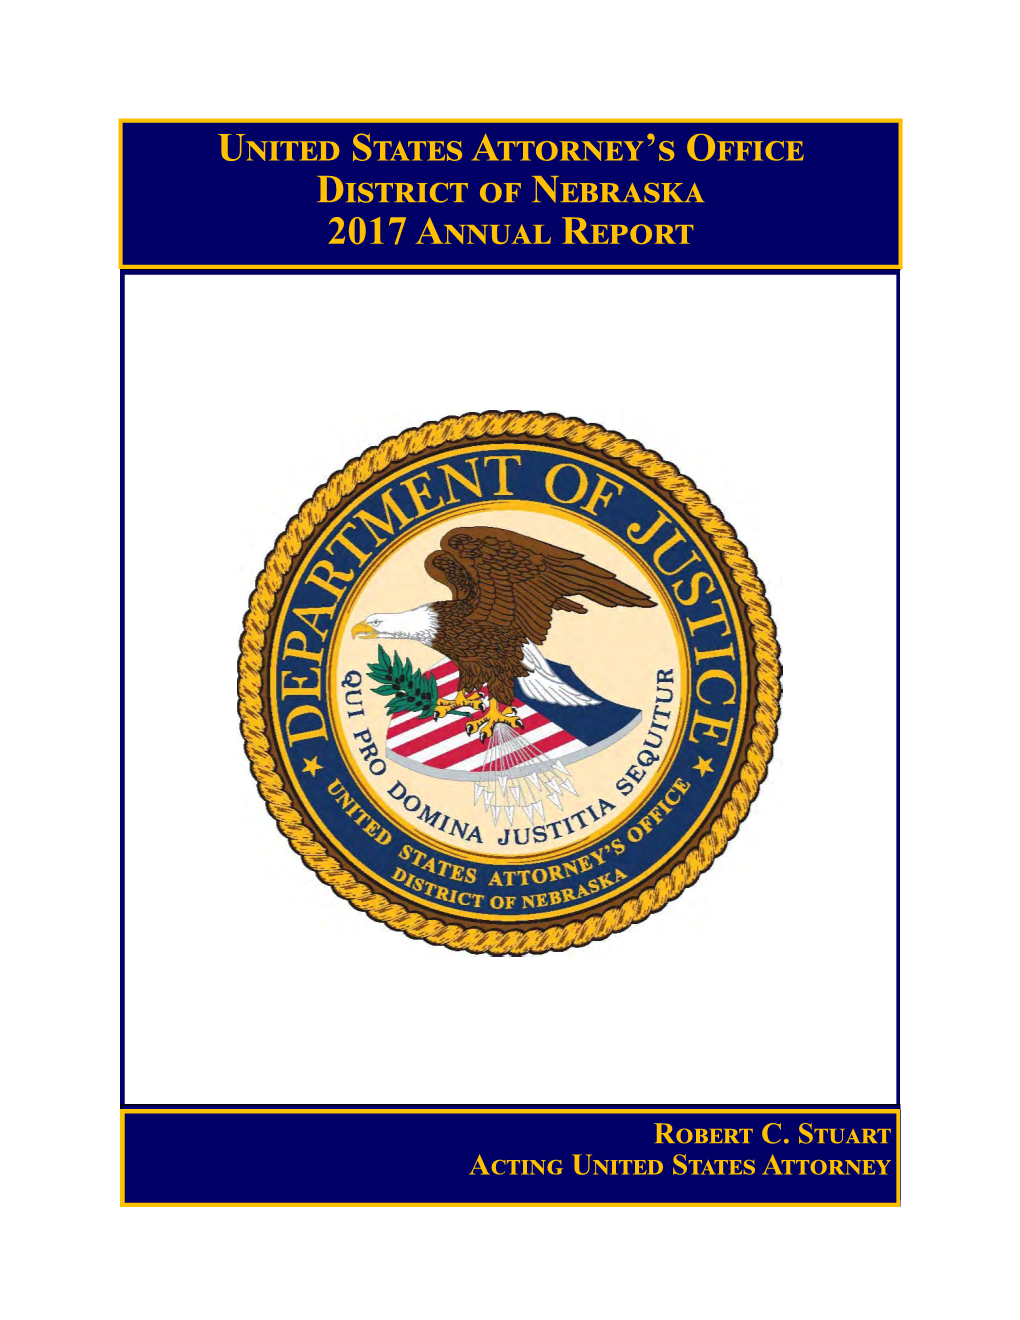 United States Attorney's Office District of Nebraska 2017 Annual Report